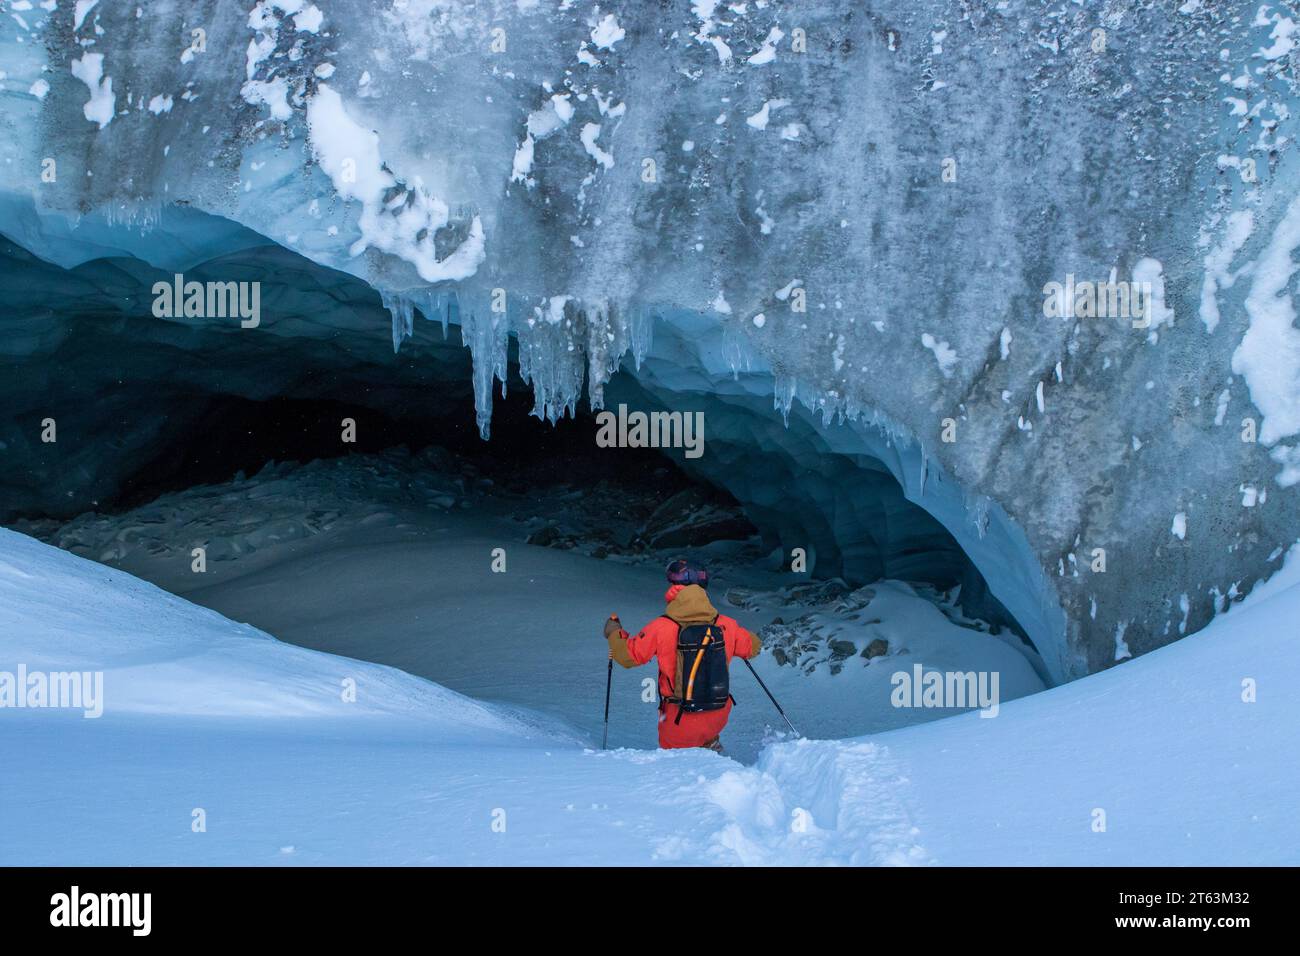 Back view of unrecognizable skier with ski poles walking in cave at snowy mountain while exploring during vacation at Swiss Alps Stock Photo